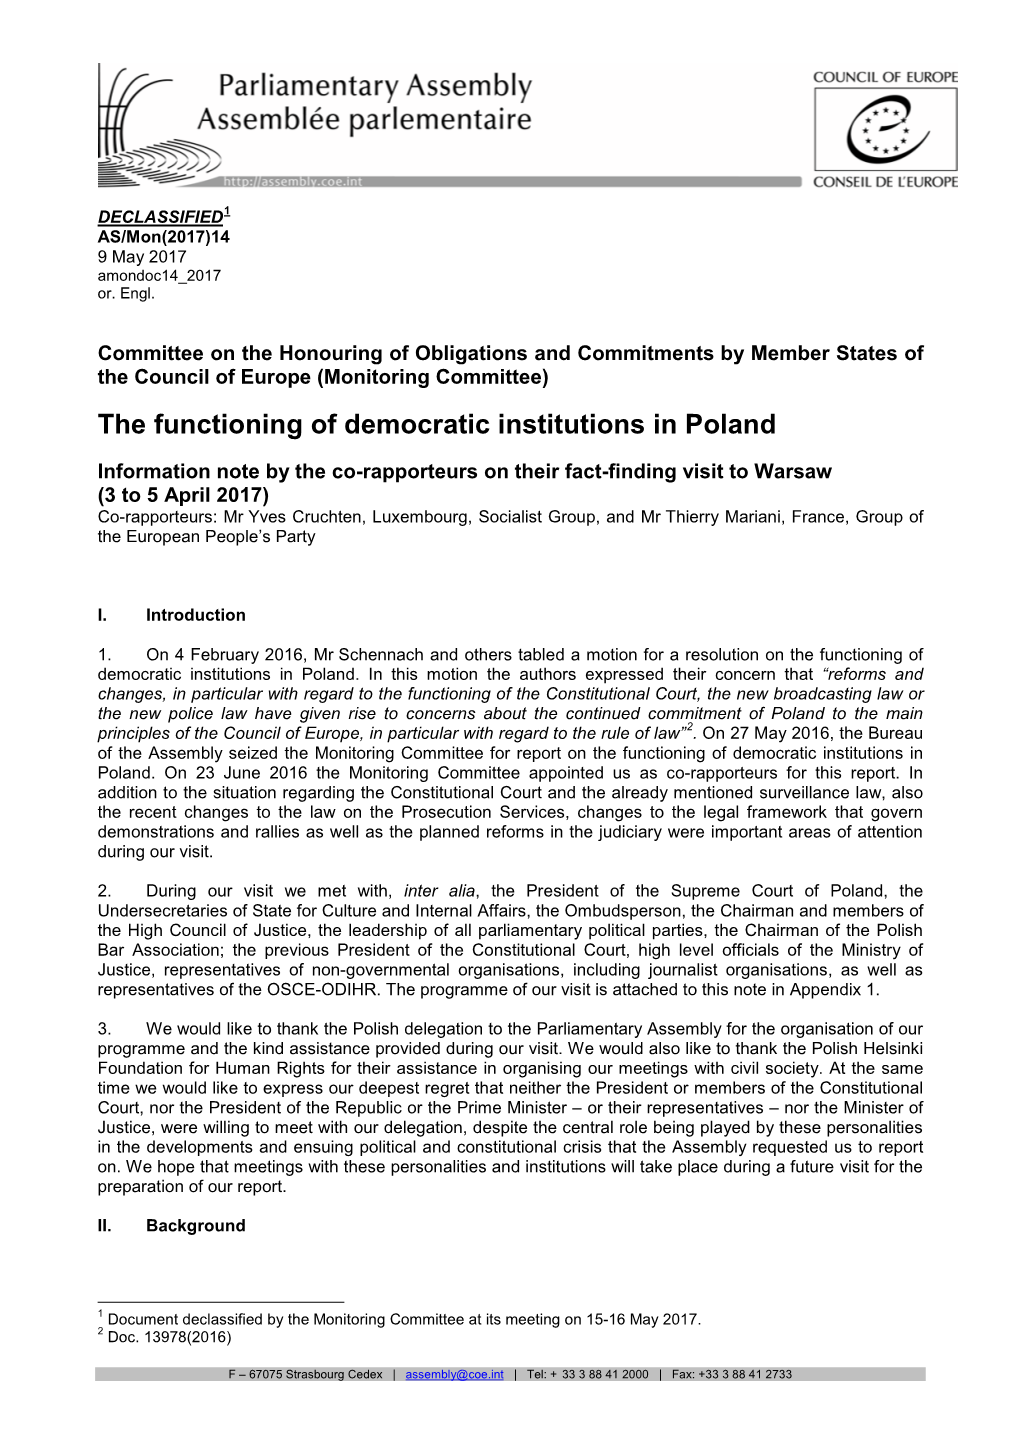 The Functioning of Democratic Institutions in Poland